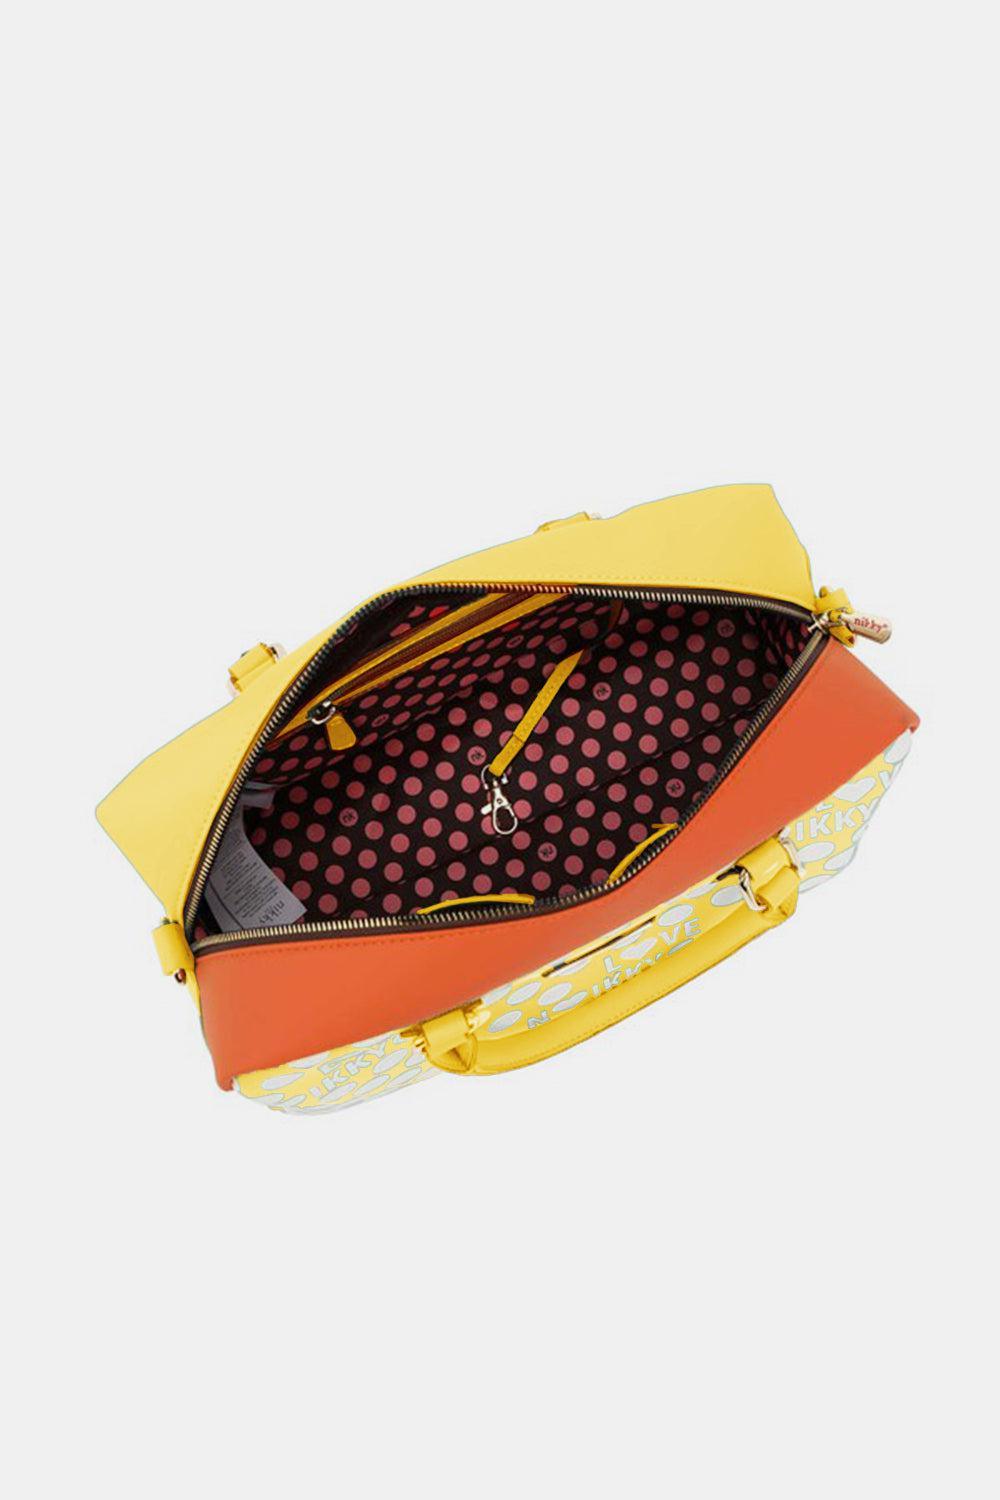 a yellow and red handbag with a polka dot pattern